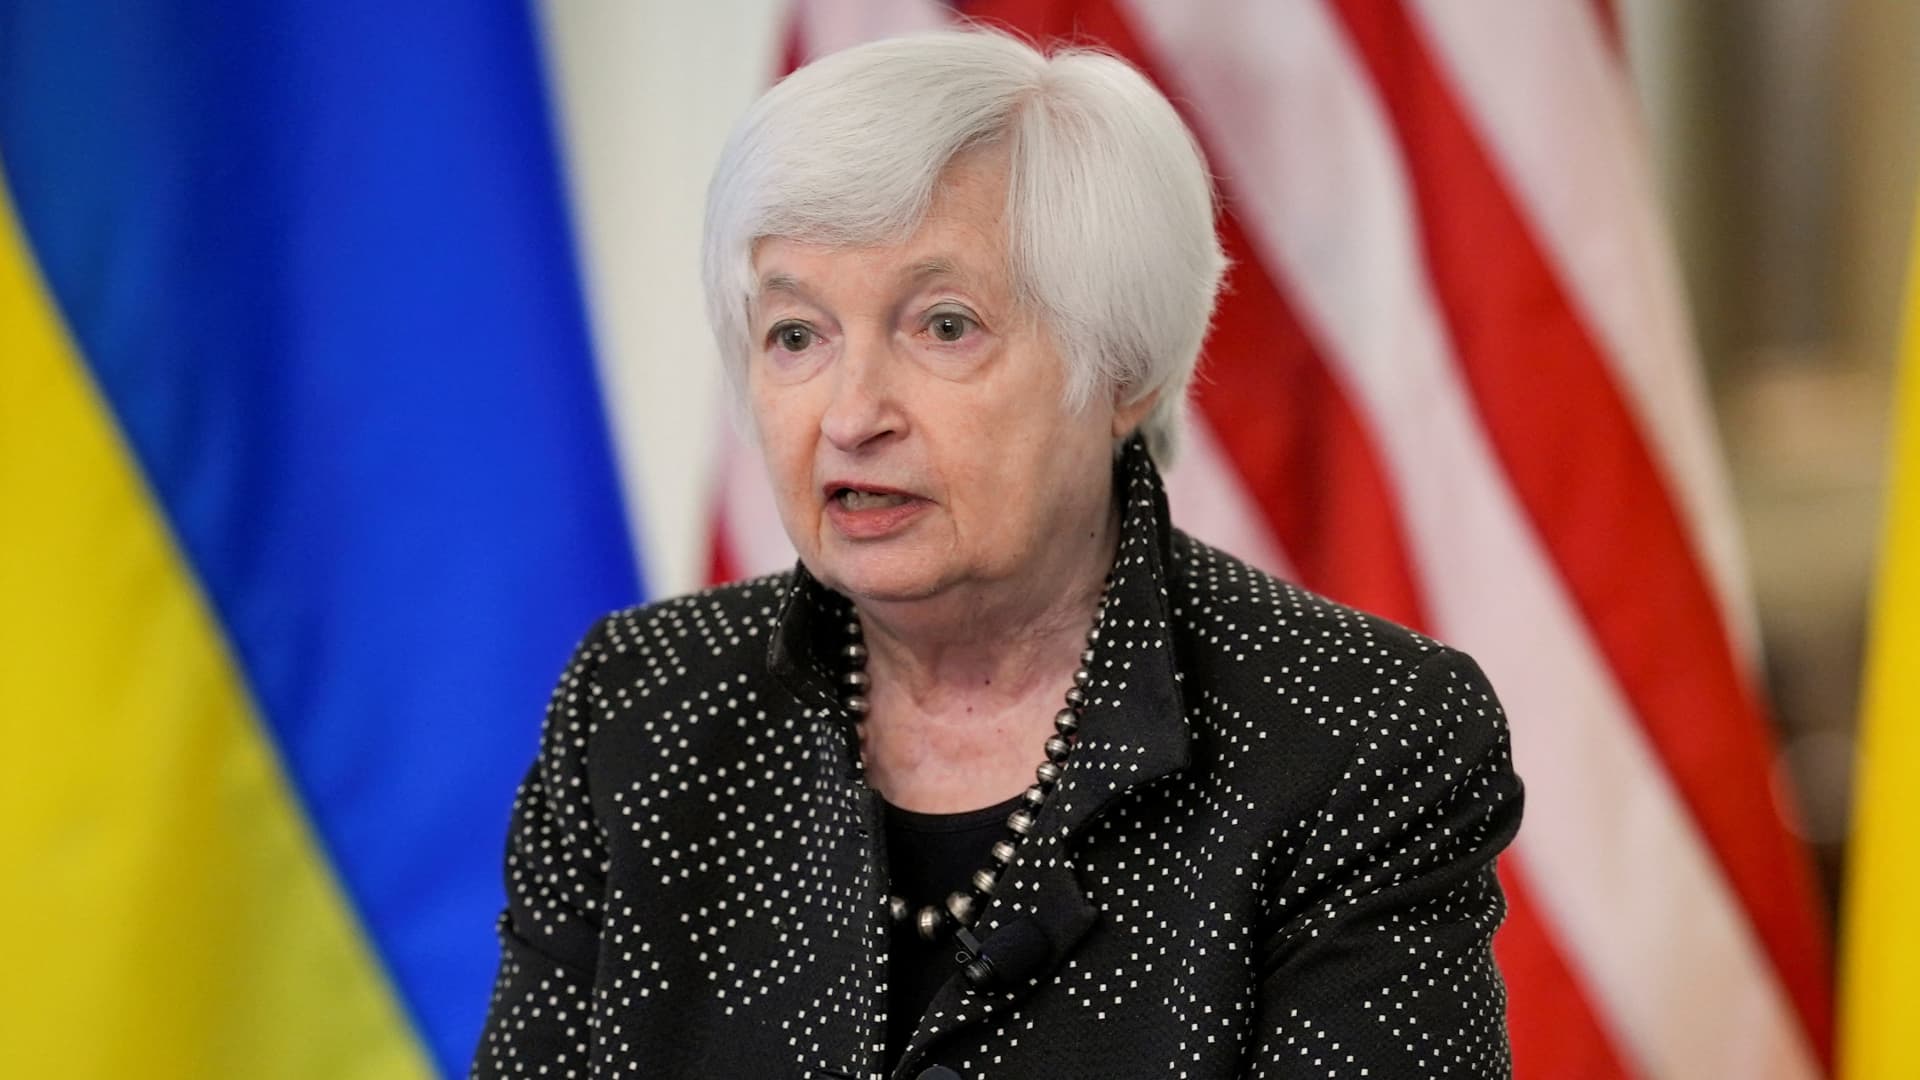 ‘Laborious decisions’ will need to be made about which bills go unpaid if the debt ceiling is not raised, Yellen says